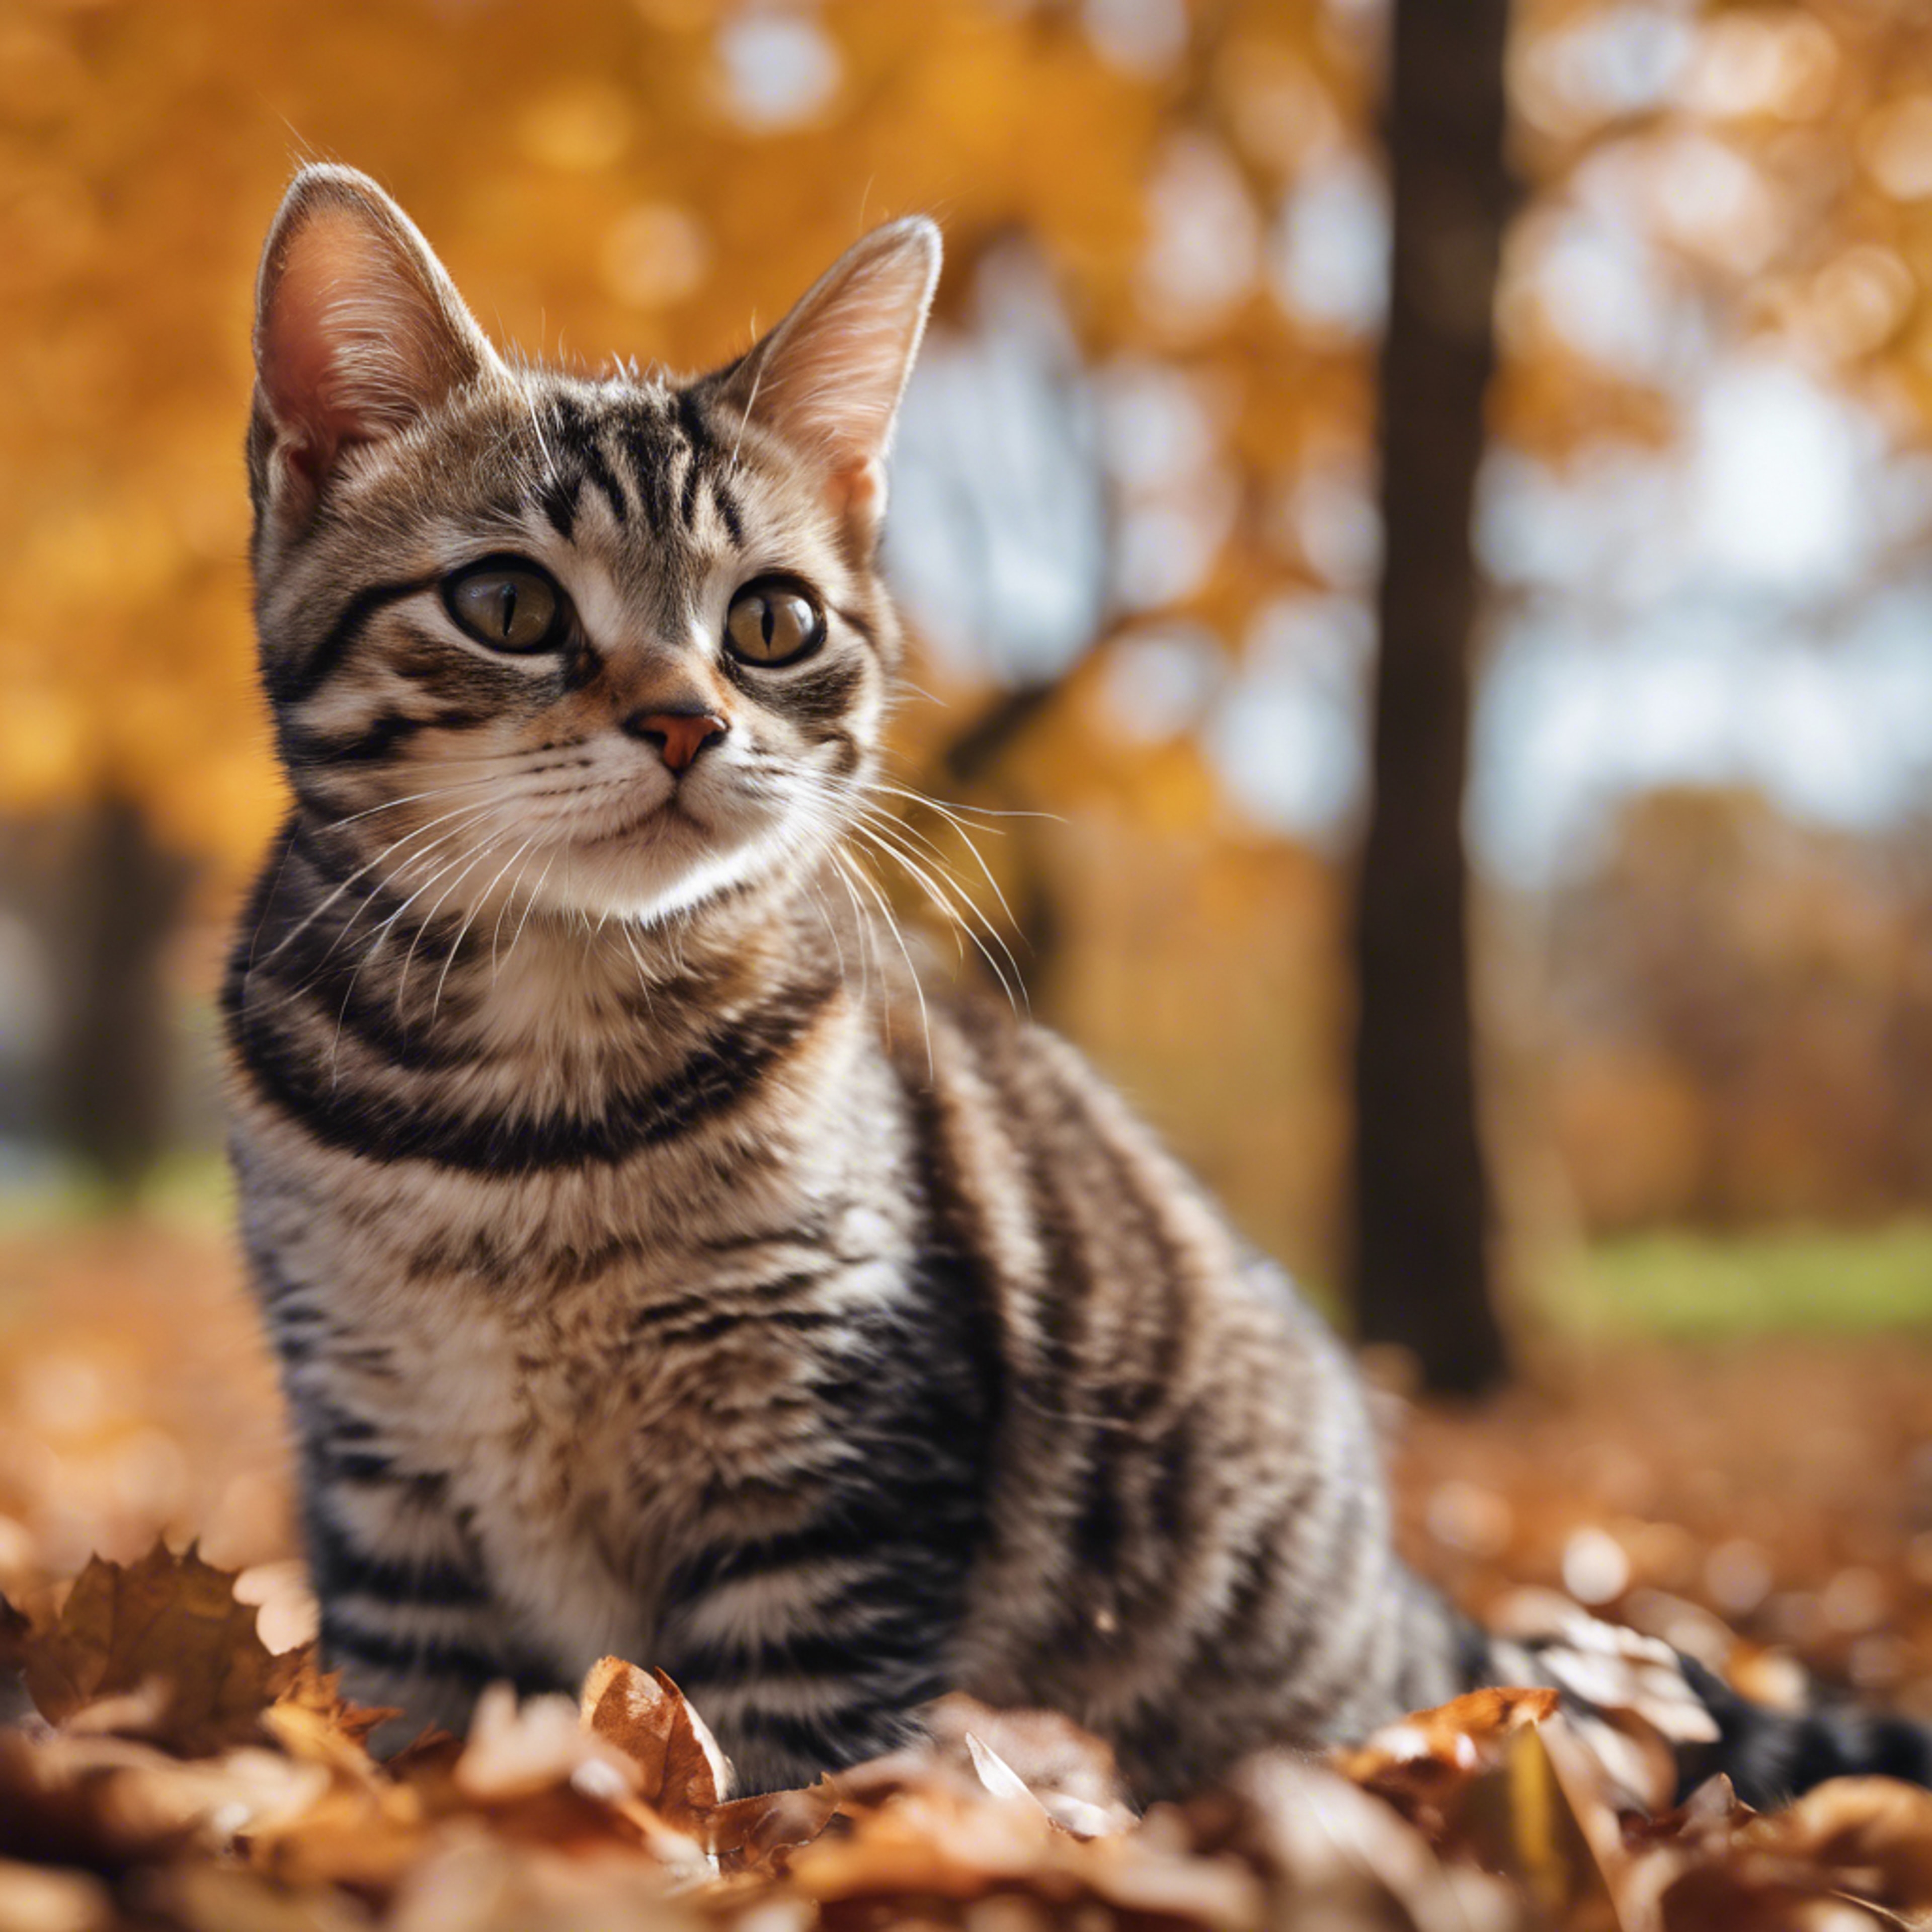 A classic brown tabby American Shorthair kitten lost in her daydreams, busy watching a world full of robust maple trees dancing with autumn winds. Wallpaper[94549d28d418408fbb13]